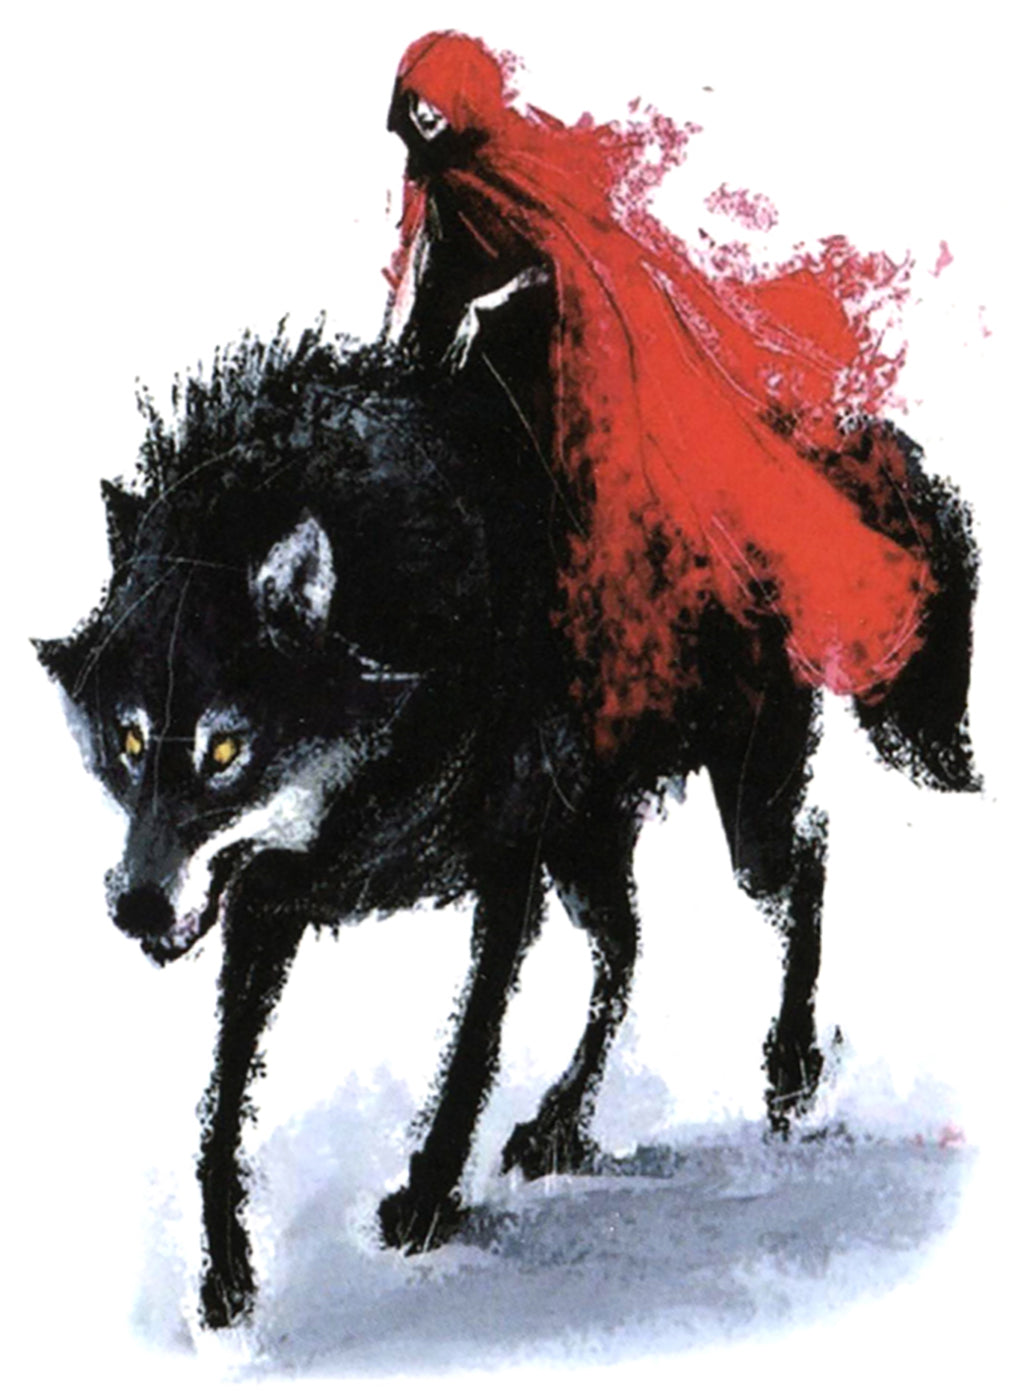 Red Riding Hood Wolf Ride Twisted Romance Shifter Waterproof Temporary Tattoos 2 Sheets